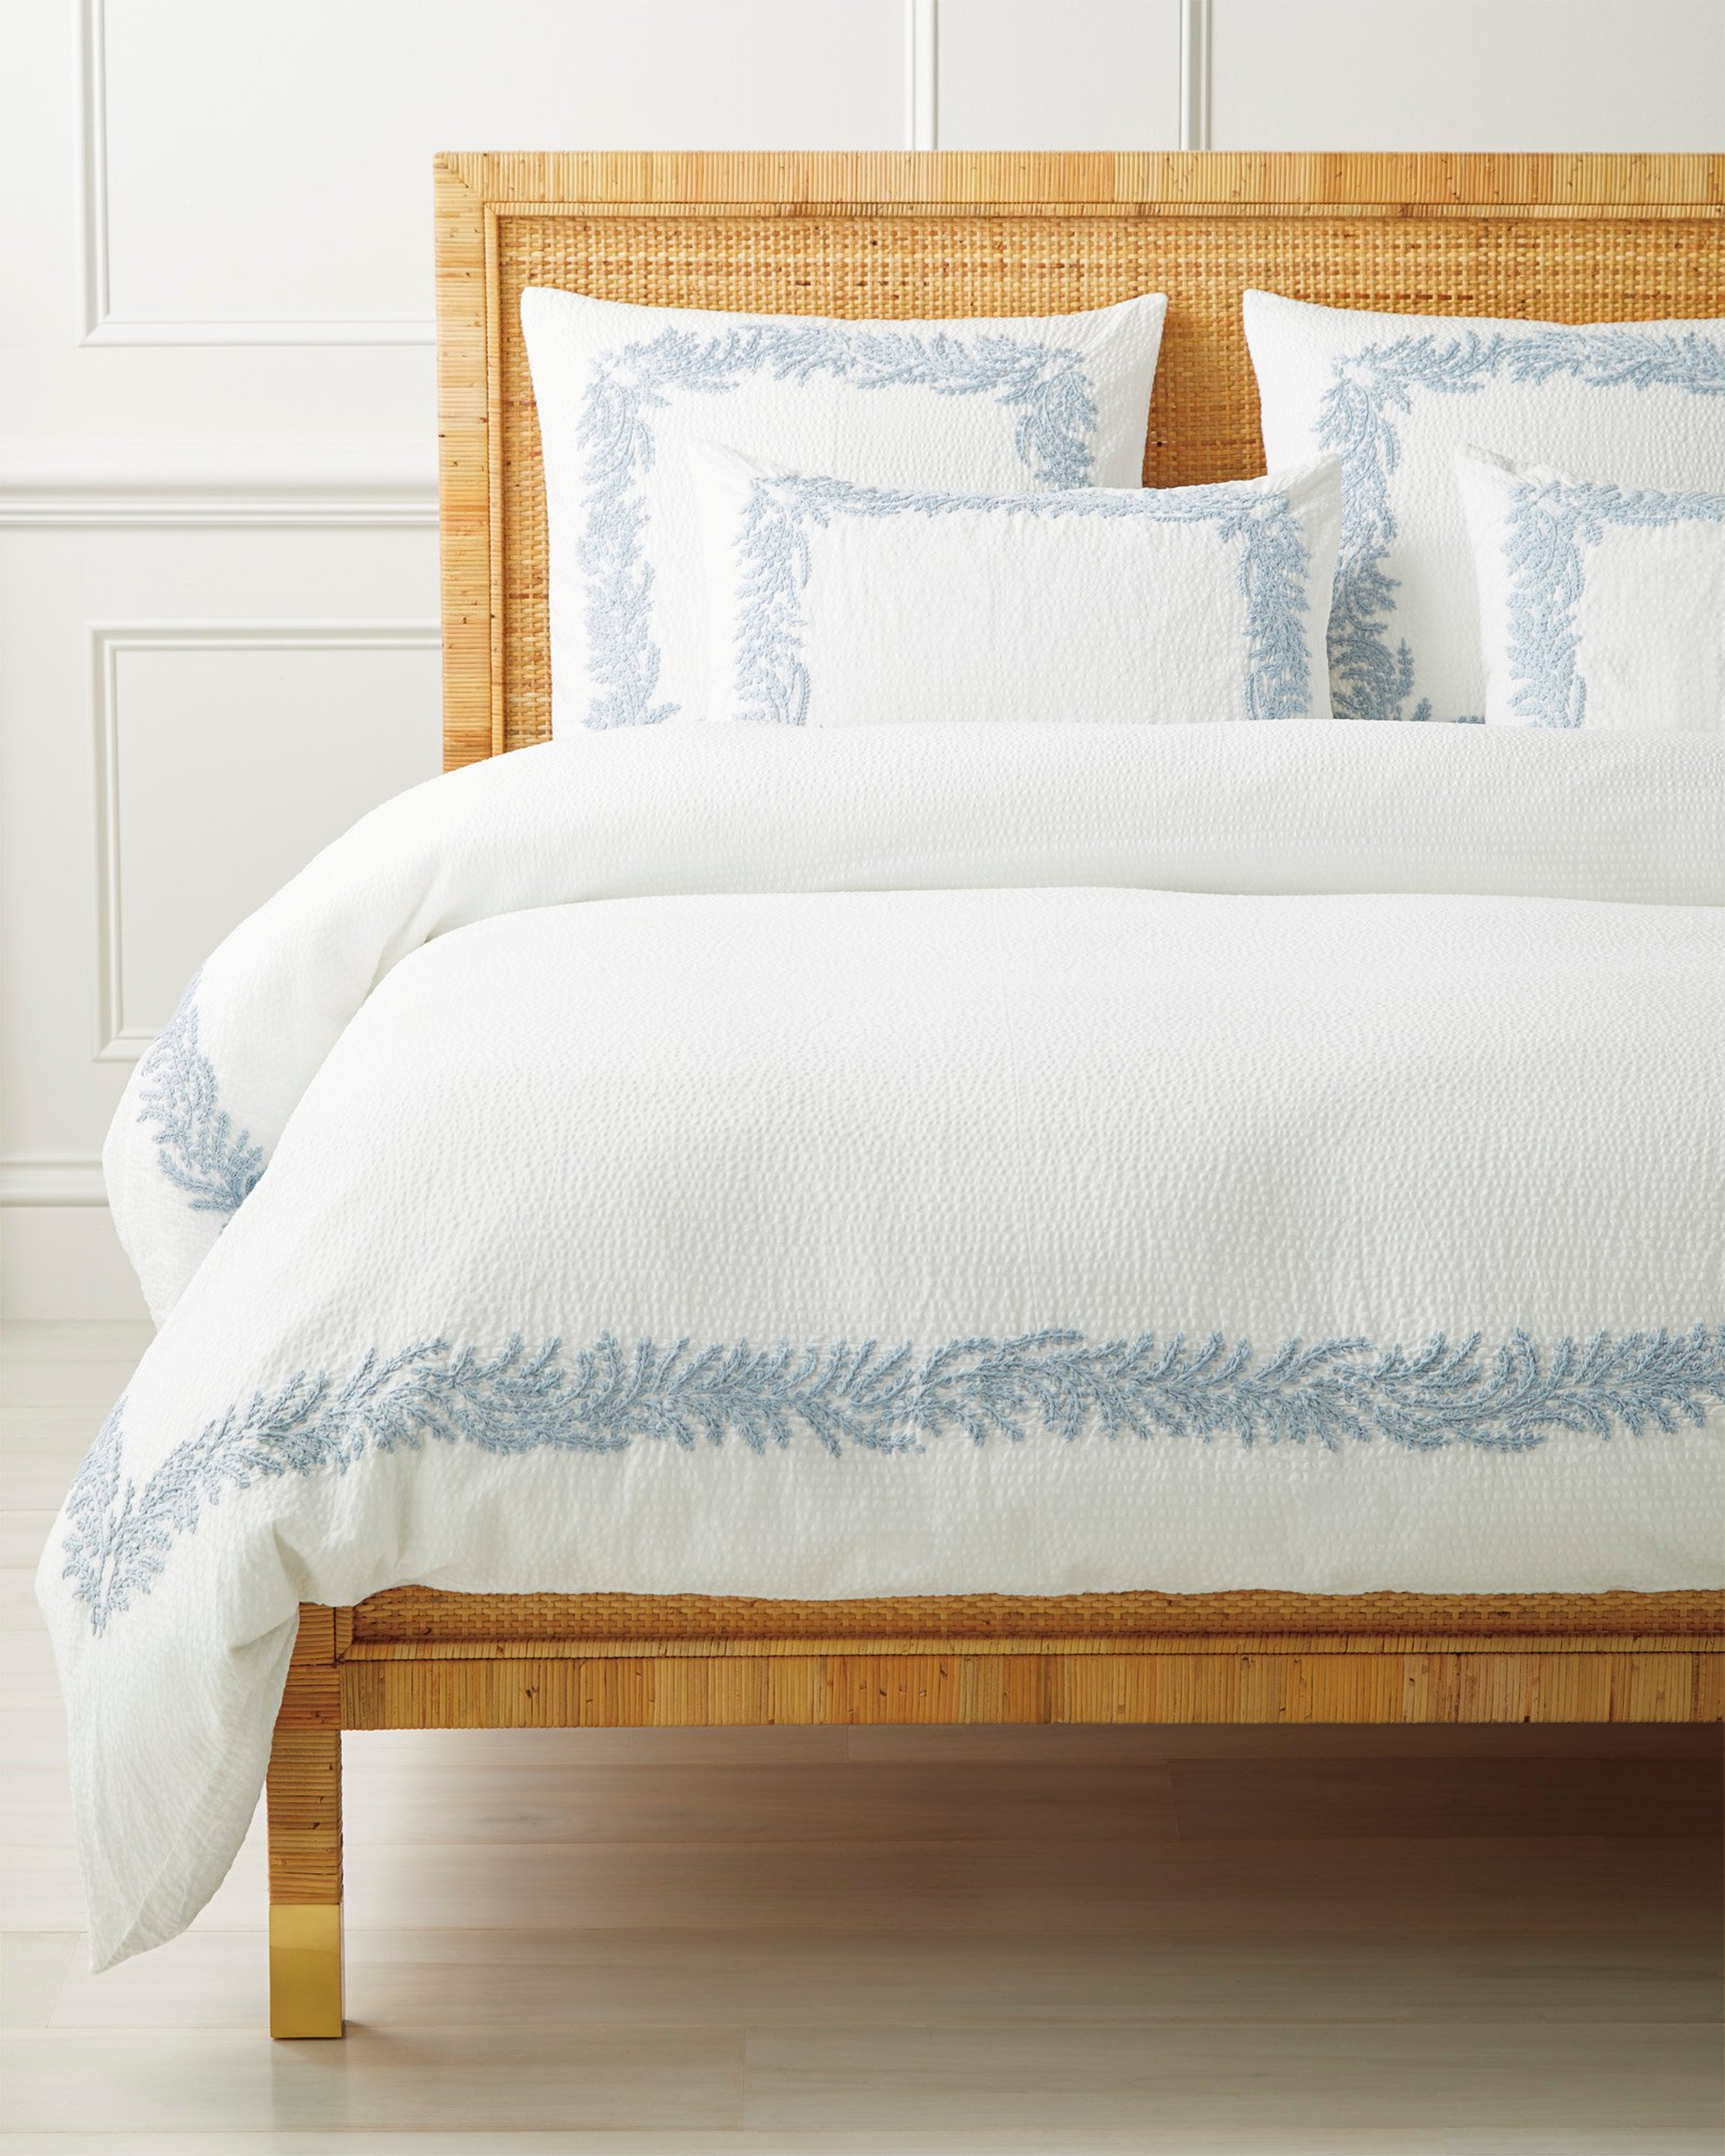 Westport Duvet Cover - Serena and Lily